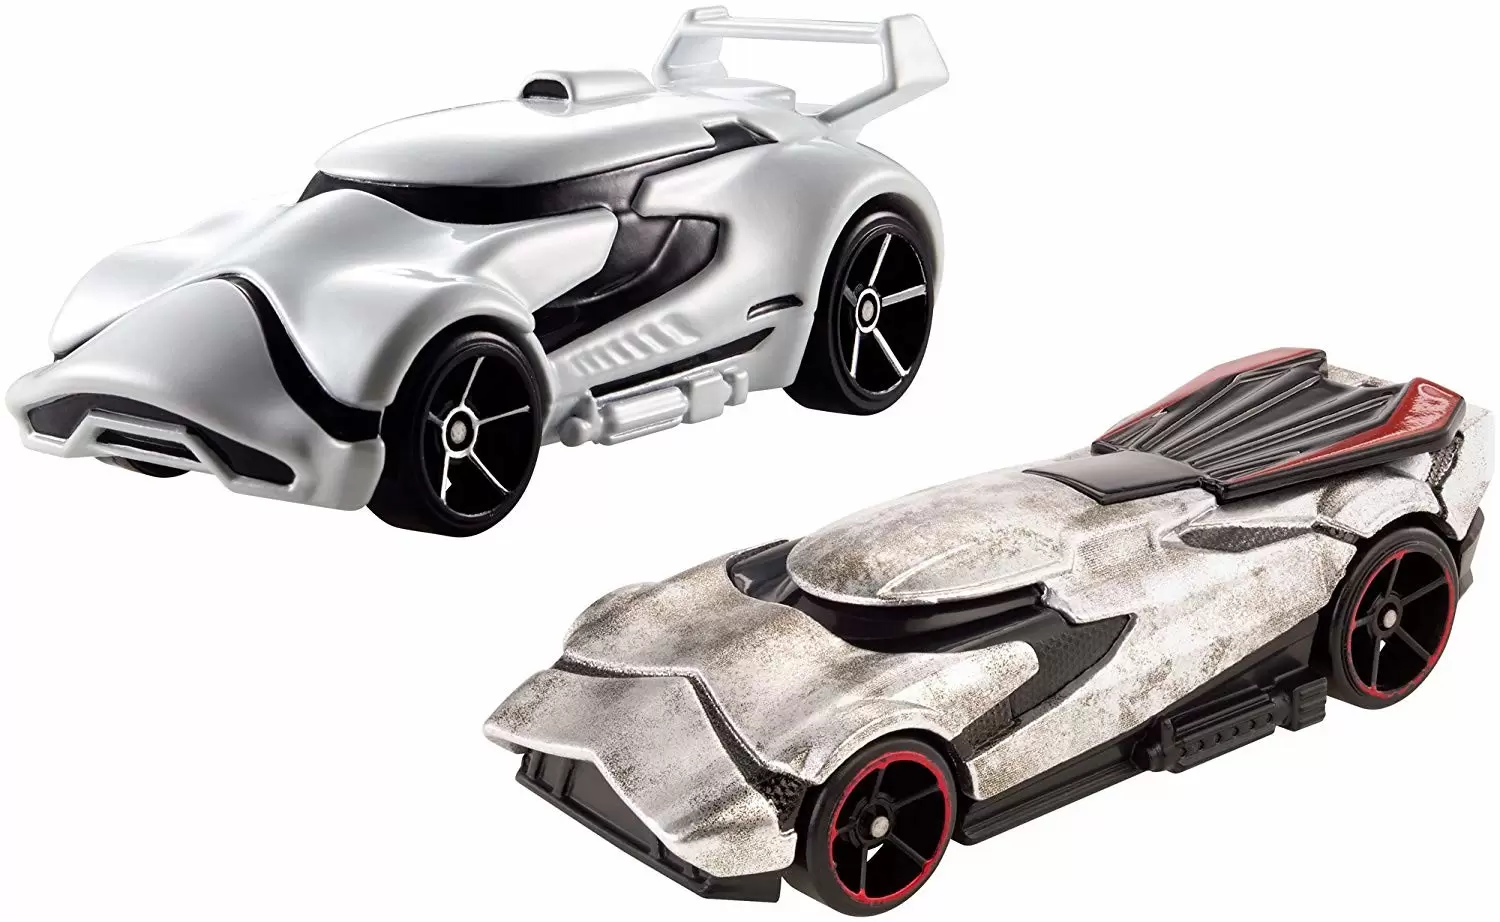 Character Cars Star Wars - First Order Stormtrooper, Capitain Phasma